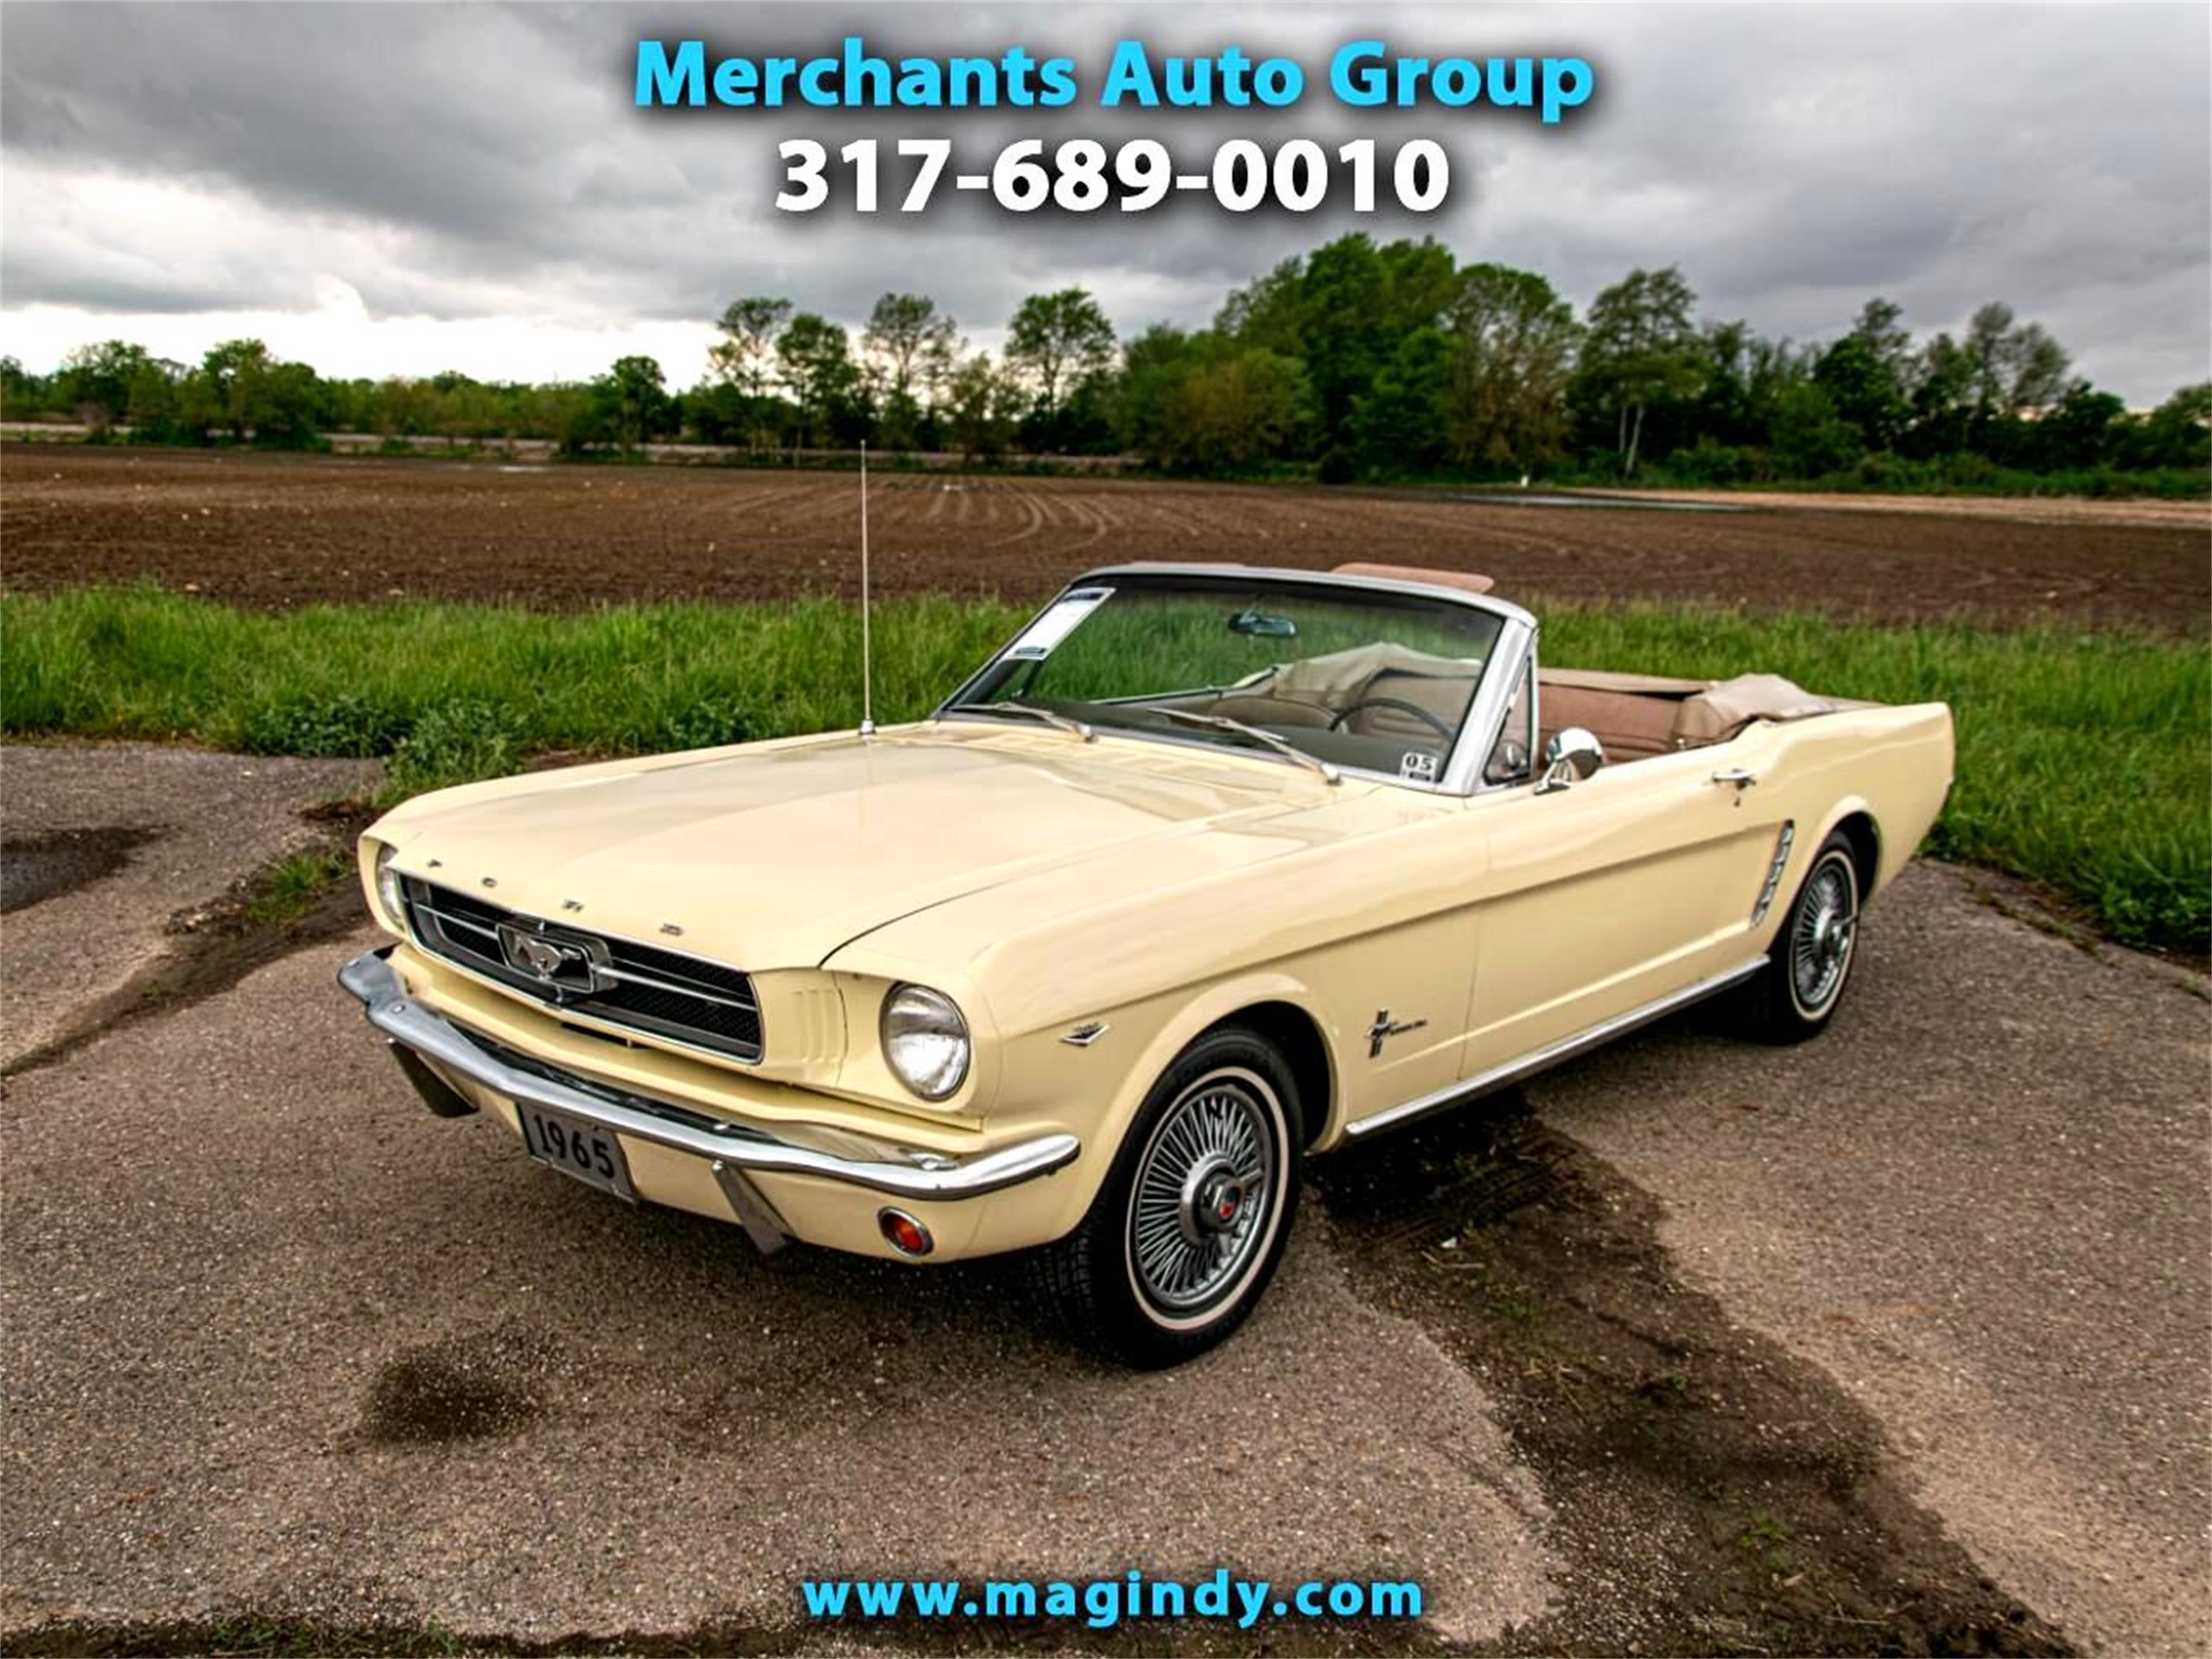 Classic Muscle Cars for Sale on ClassicCars.com - Pg 127